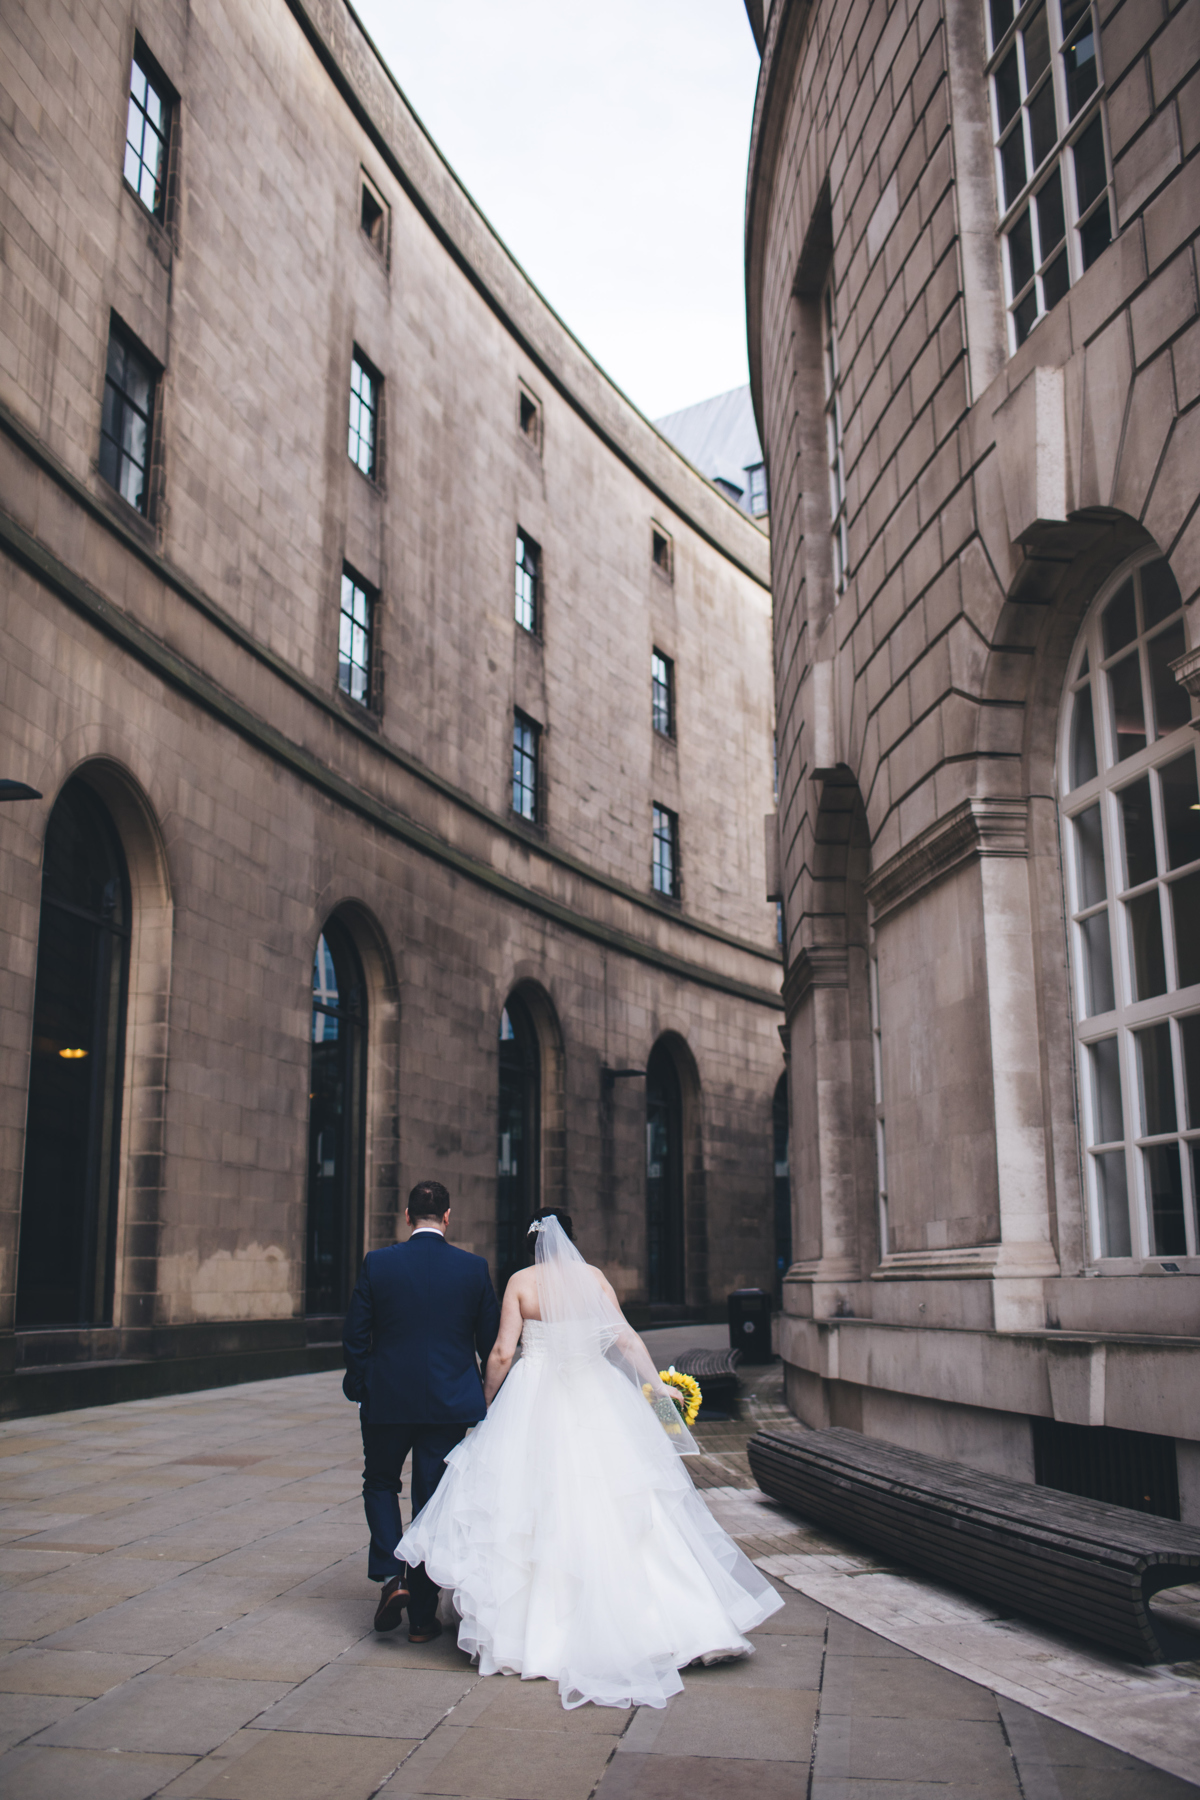 Bride and groom walking away from the camera next along a curved walkway next to the Central Library in Manchester